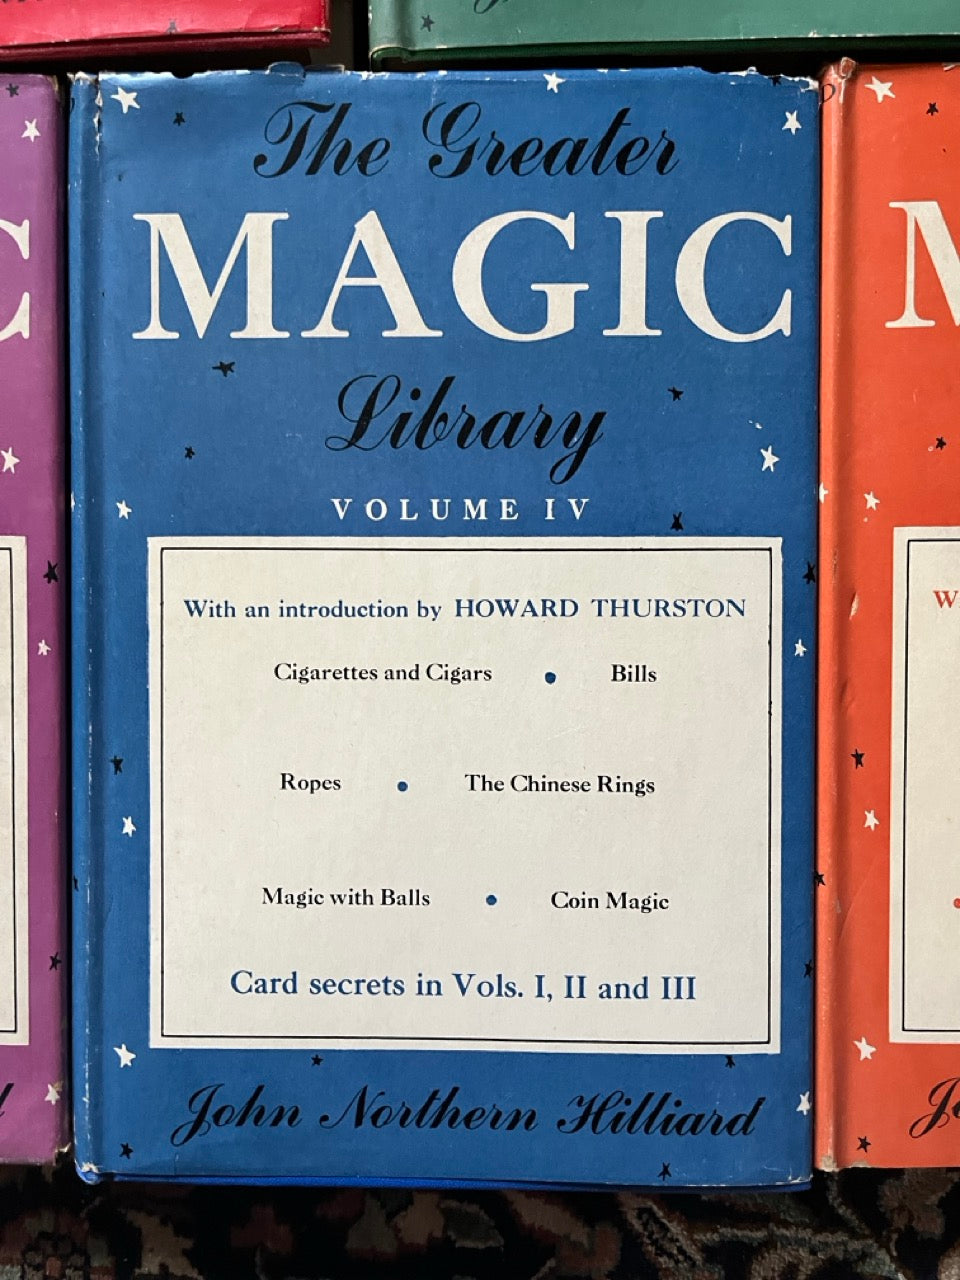 The Greater Magic Library Vol 1-5 - John Northern Hilliard